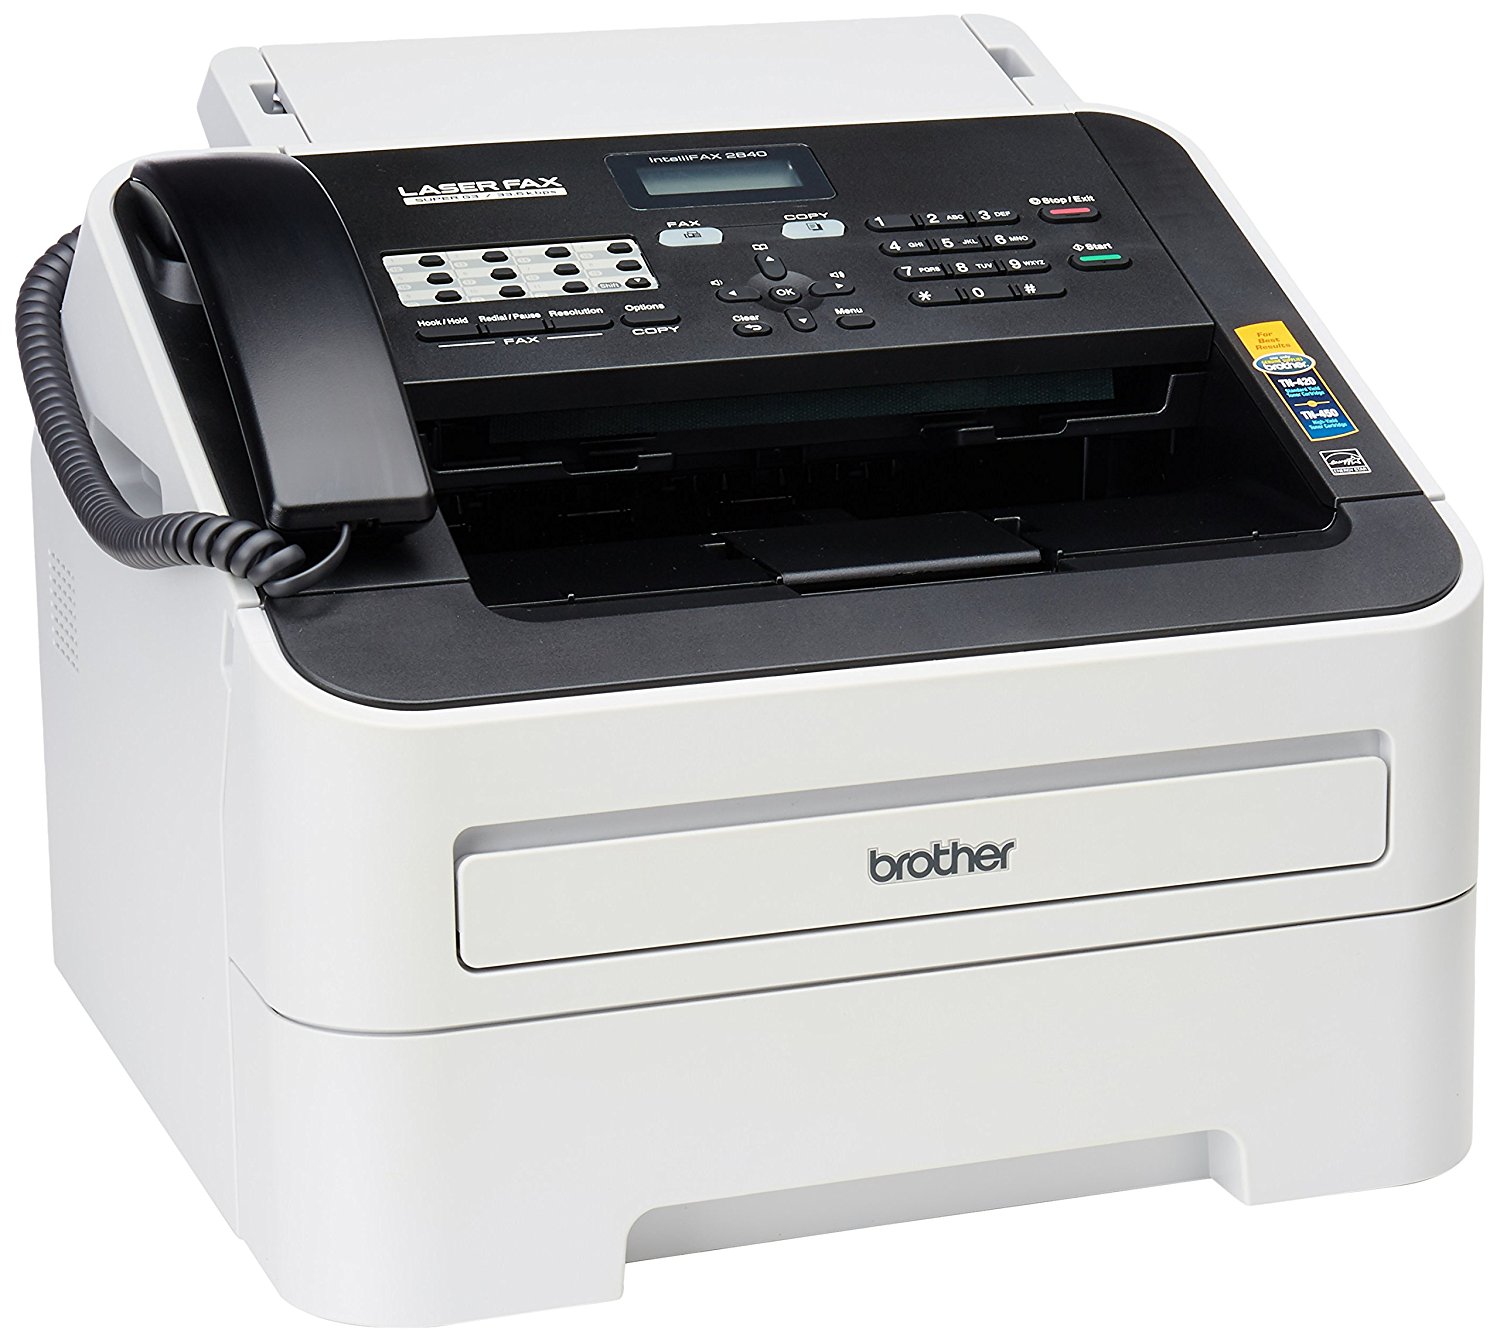 Brother Printer Brother FAX-2840 High Speed Mono Laser ...